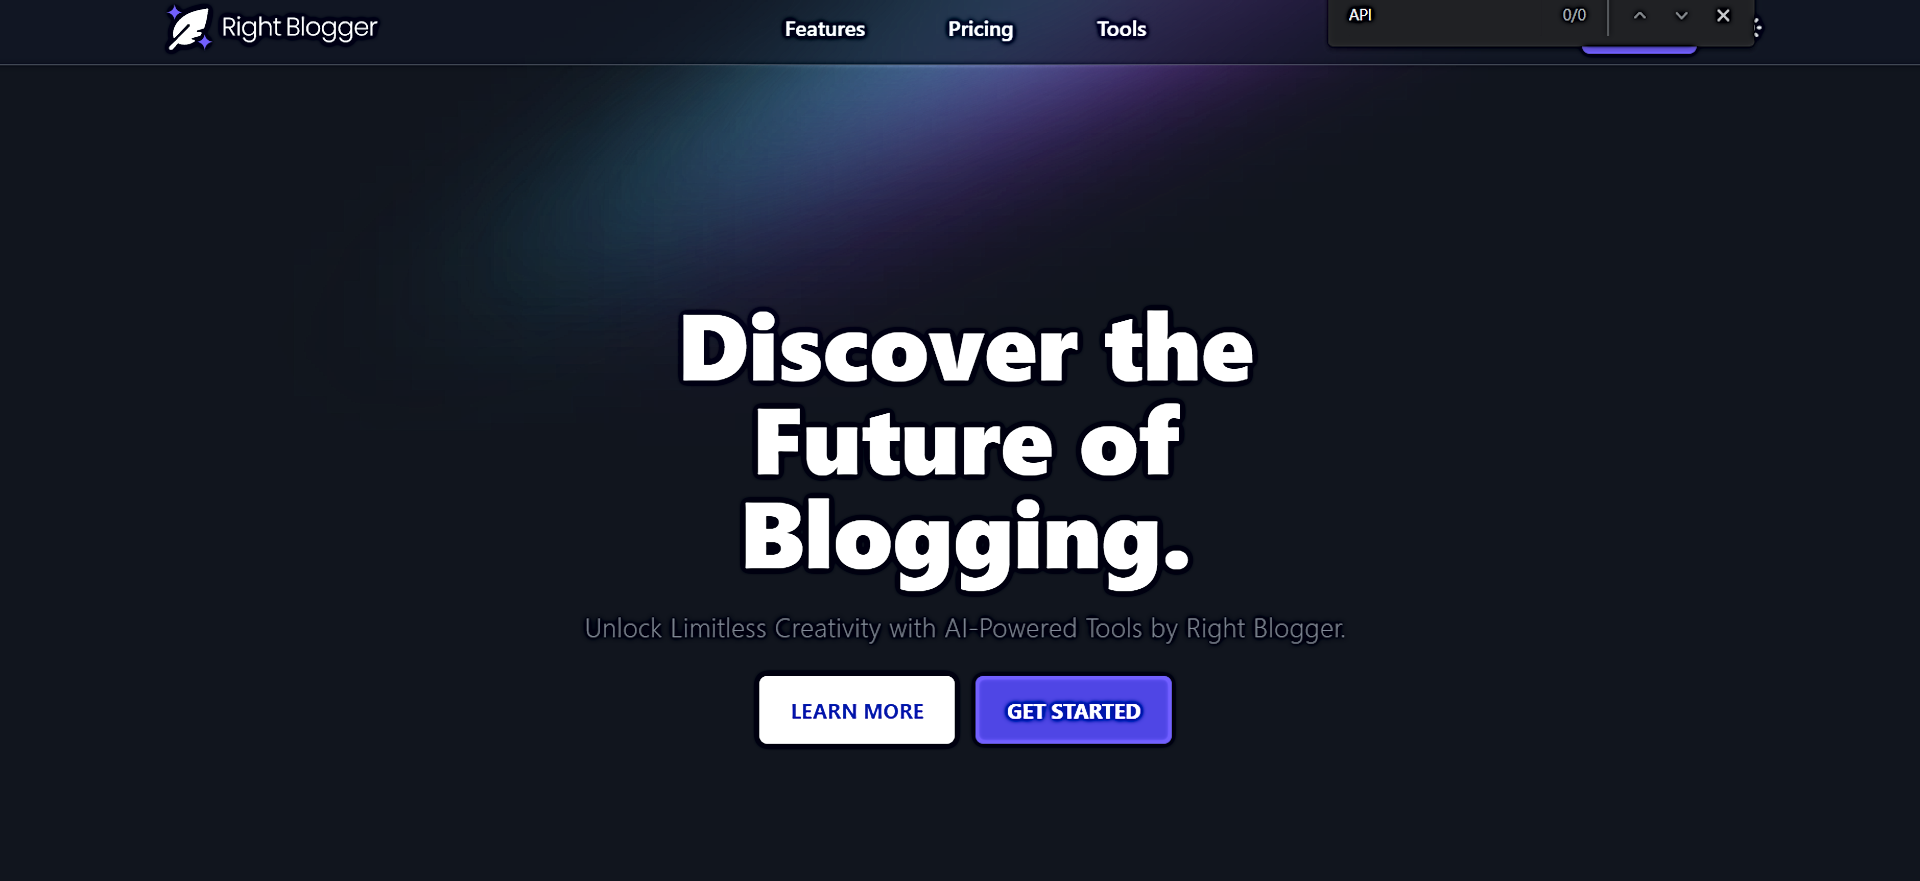 Right Blogger featured